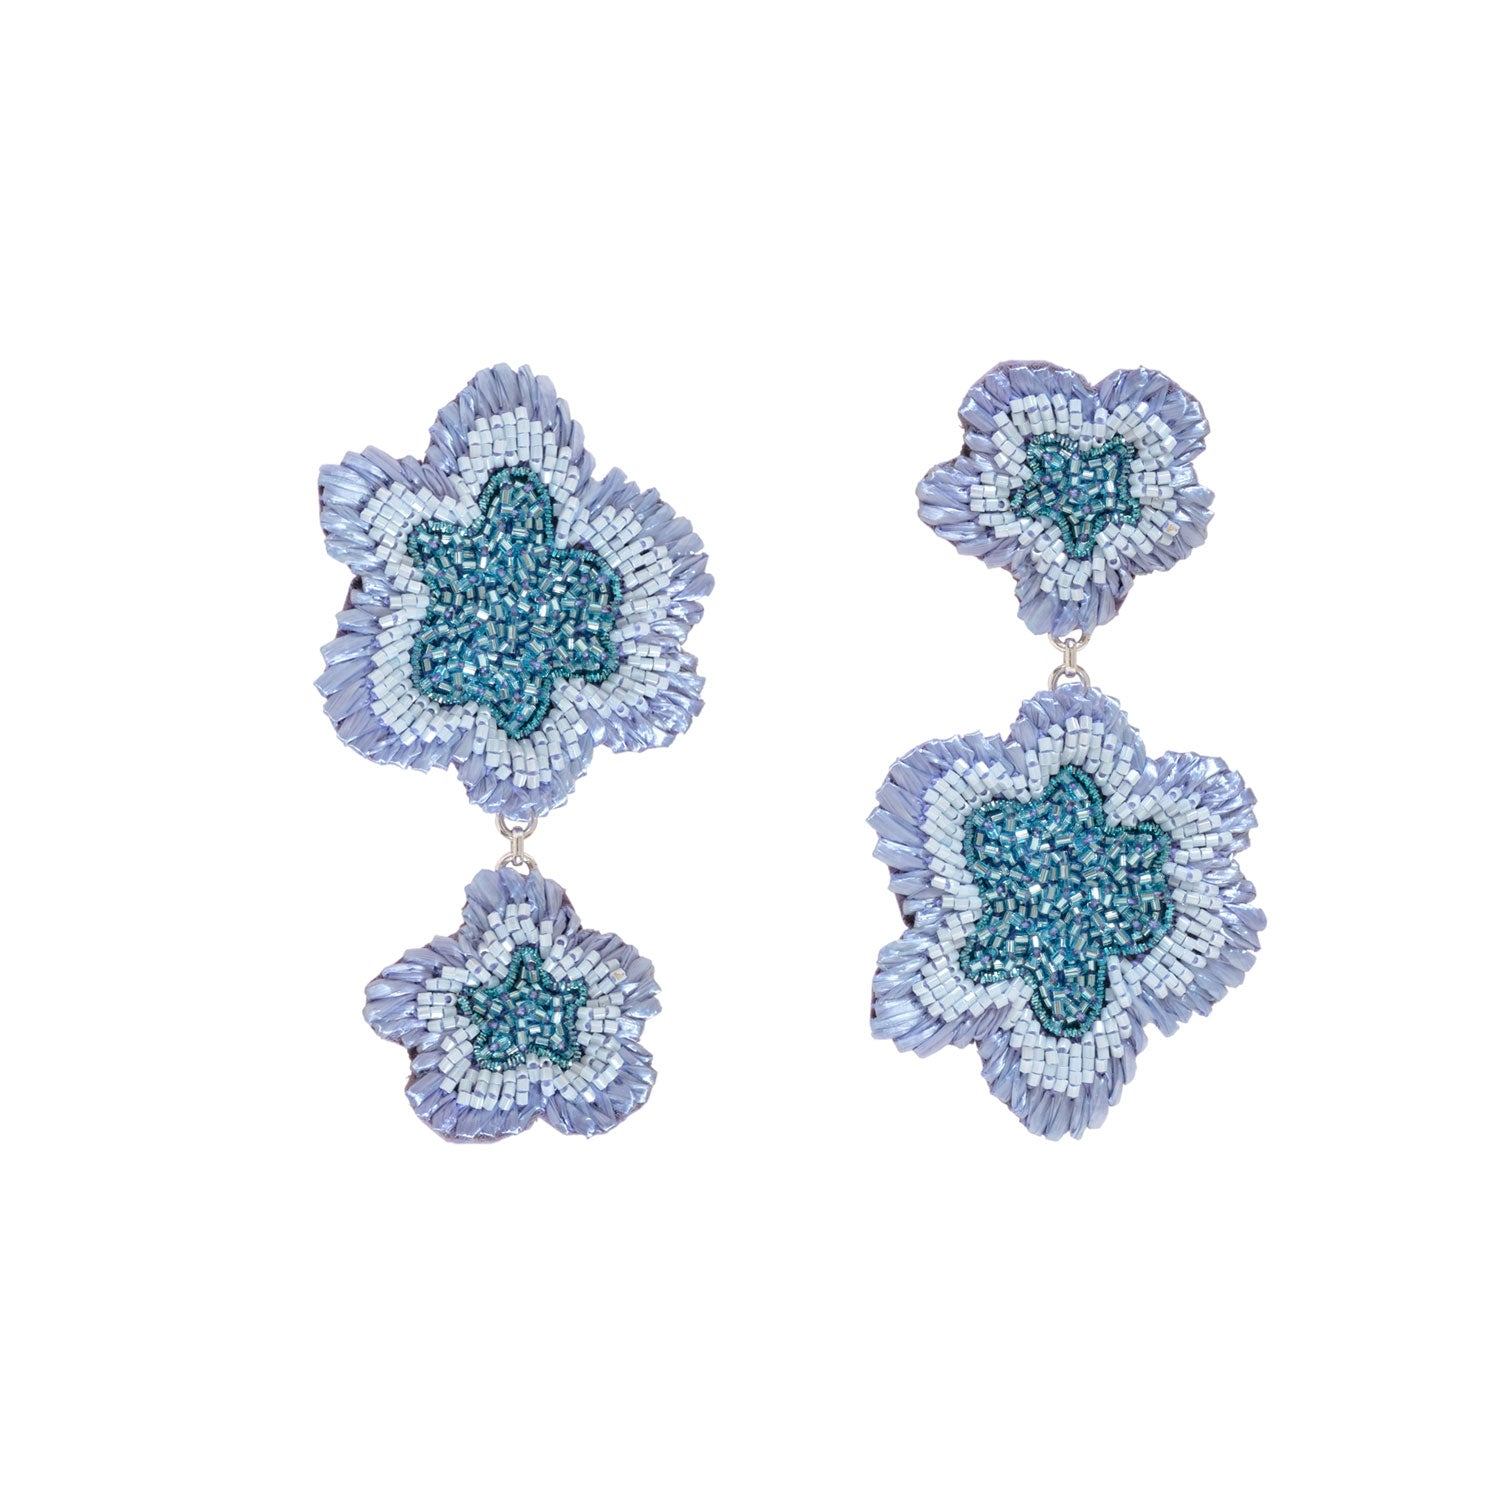 Blue Beaded Floral Double Drop Earrings on Flat White Background